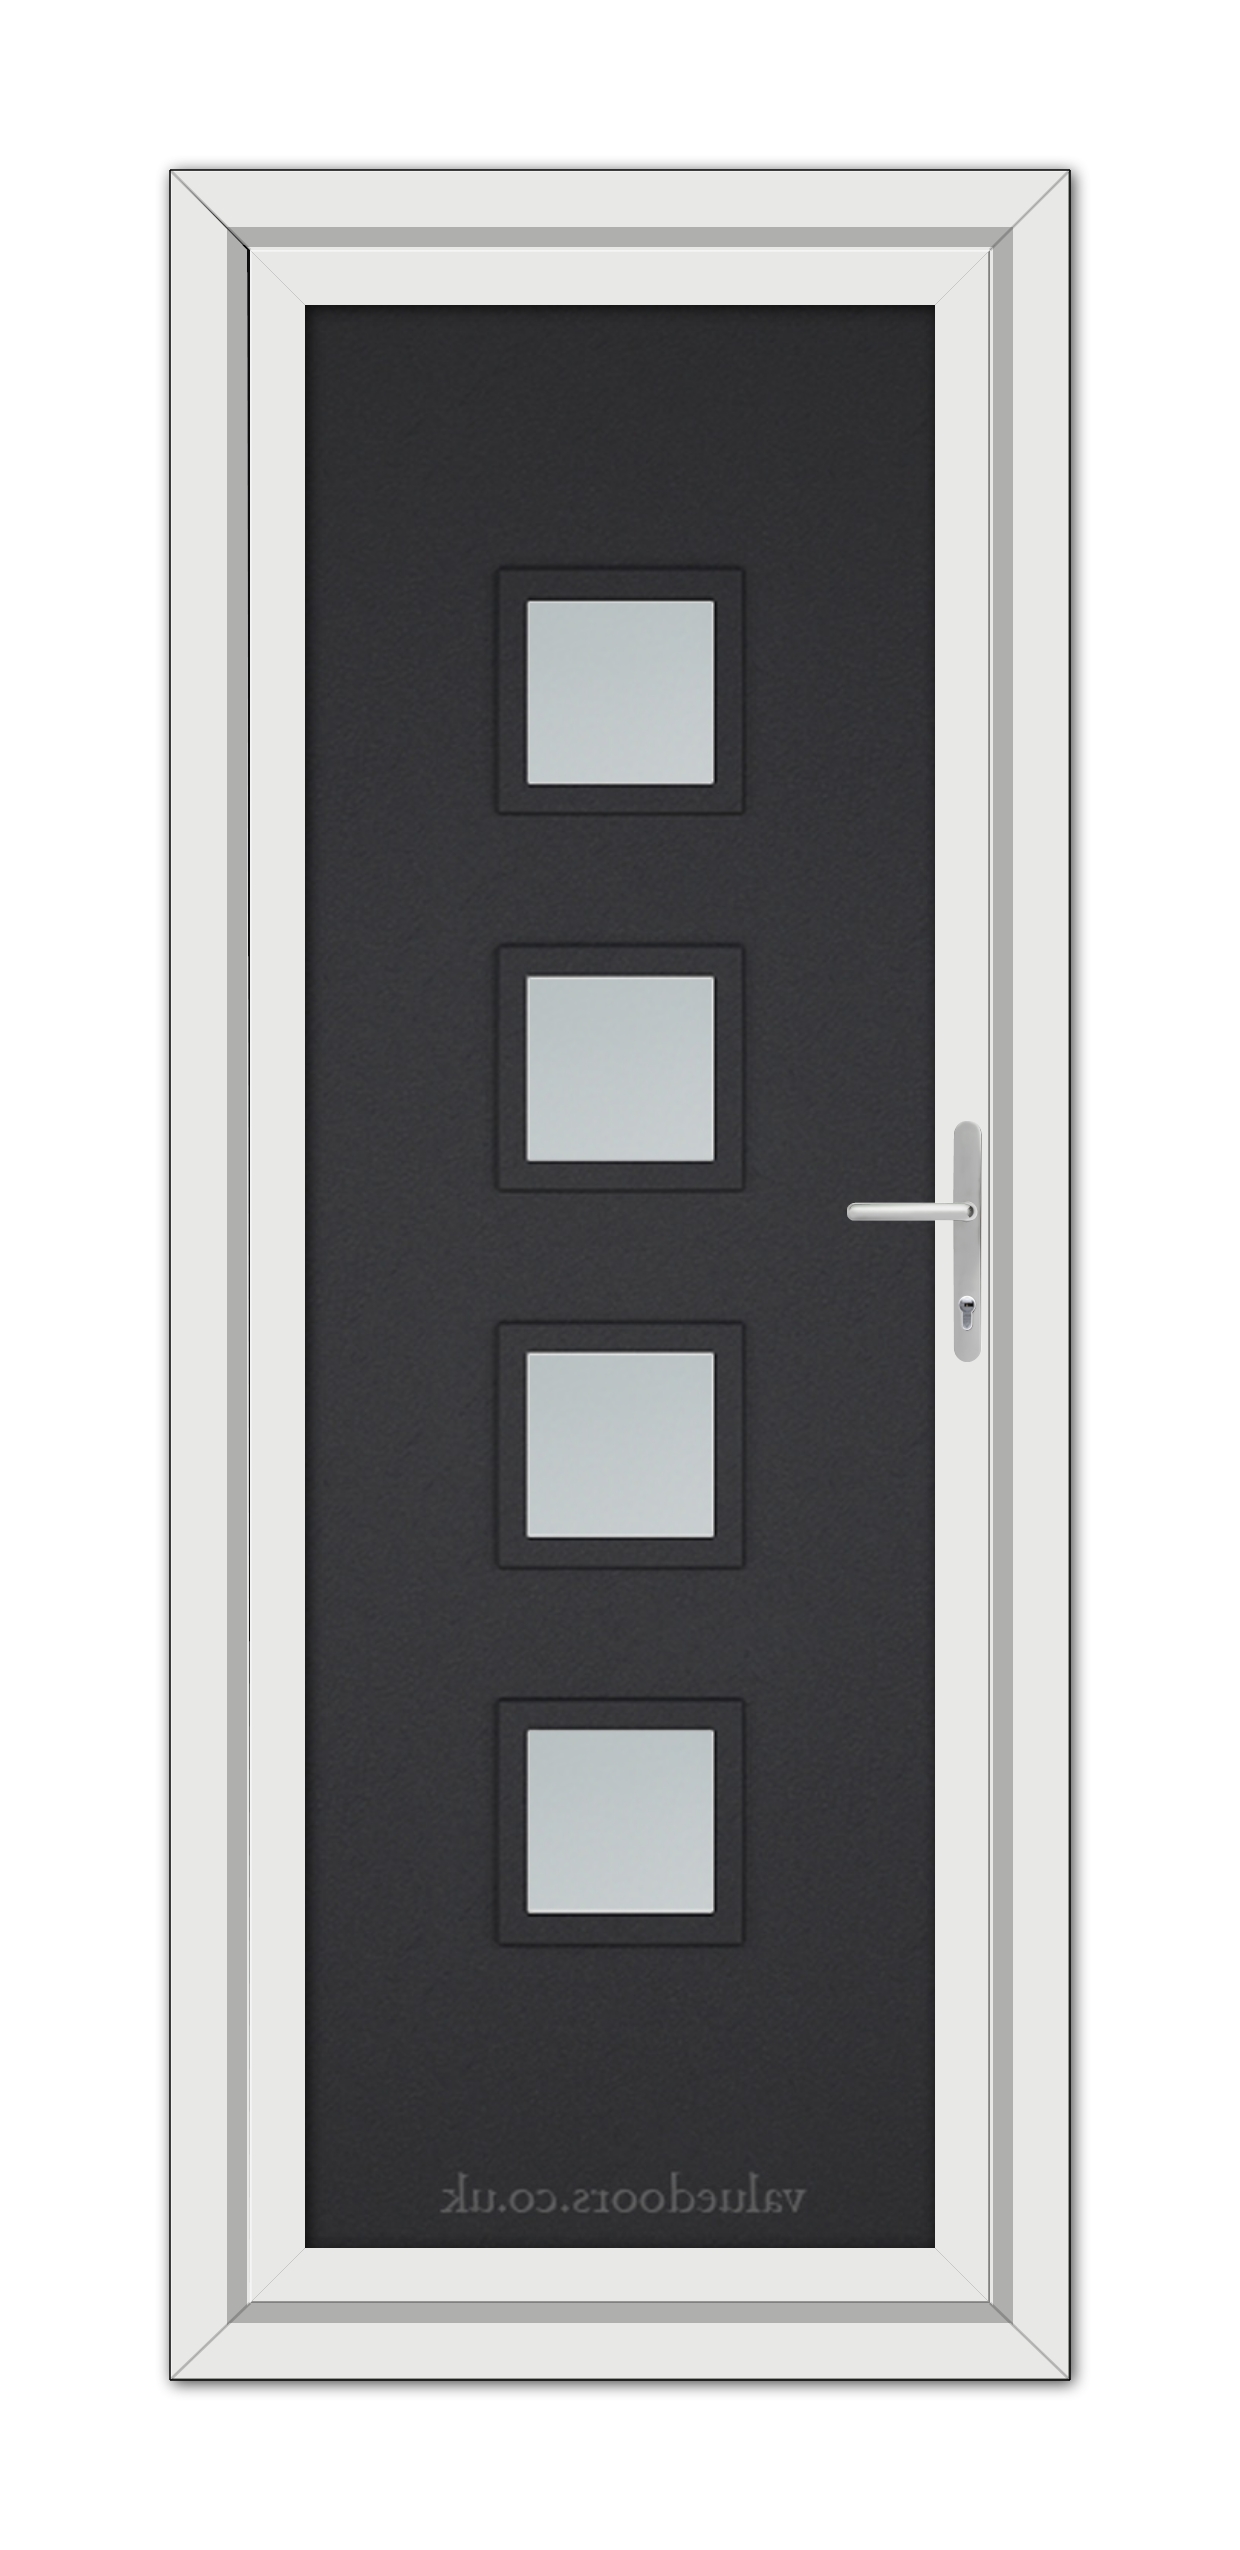 A modern Black Brown Modern 5034 uPVC door with a vertical arrangement of five frosted glass panels, a metallic handle, and a white frame.